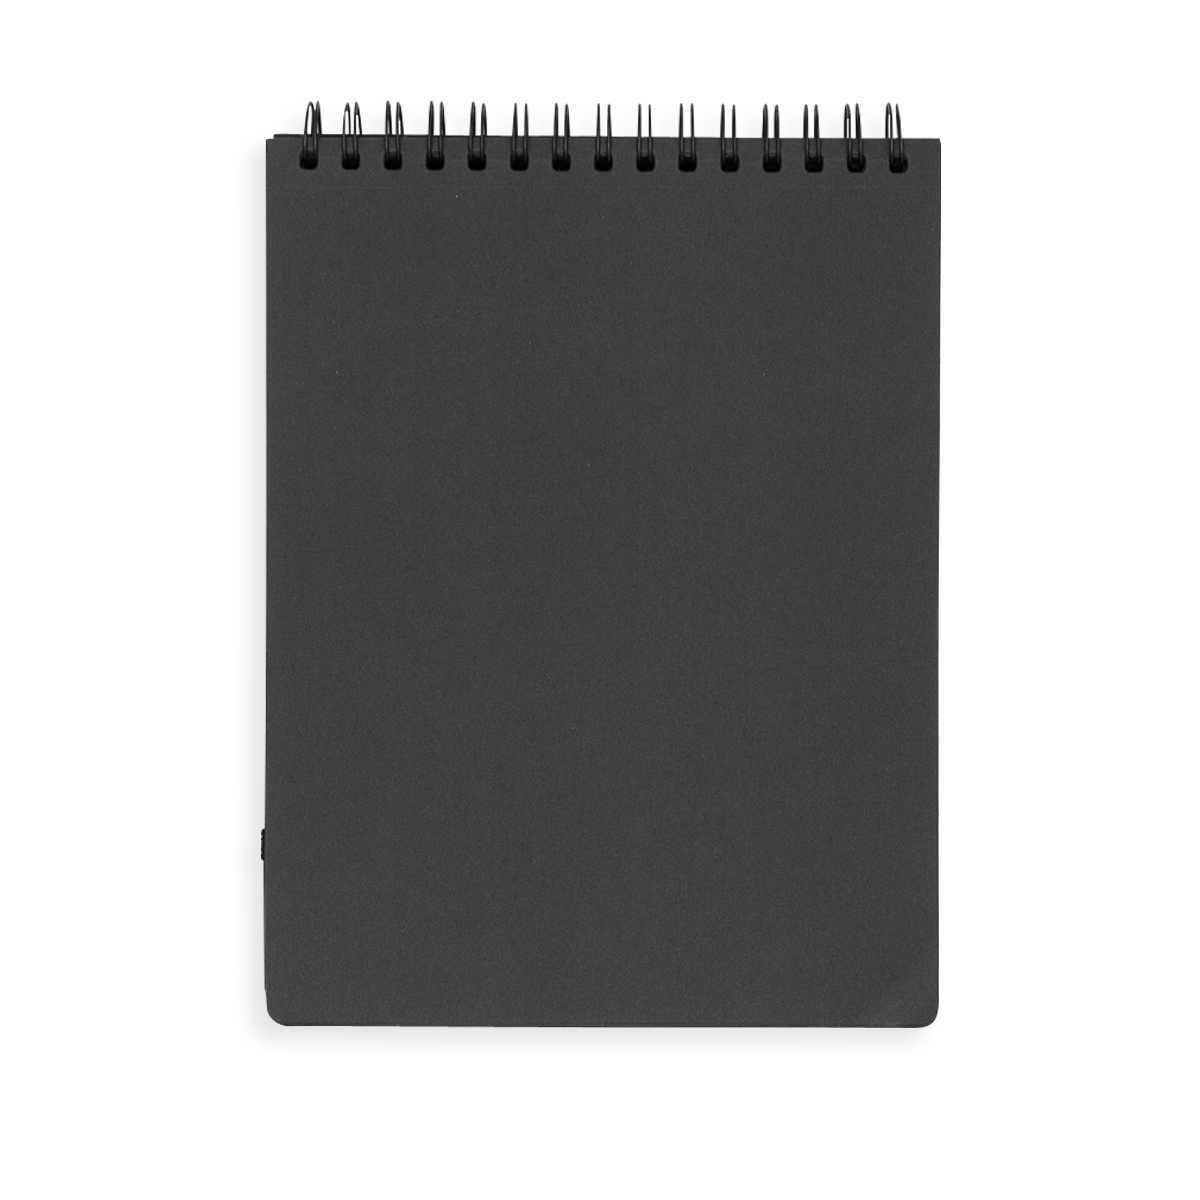 Click link to get your Black Sketchbook paper from @NIL Tech 😃👏🏼 Me